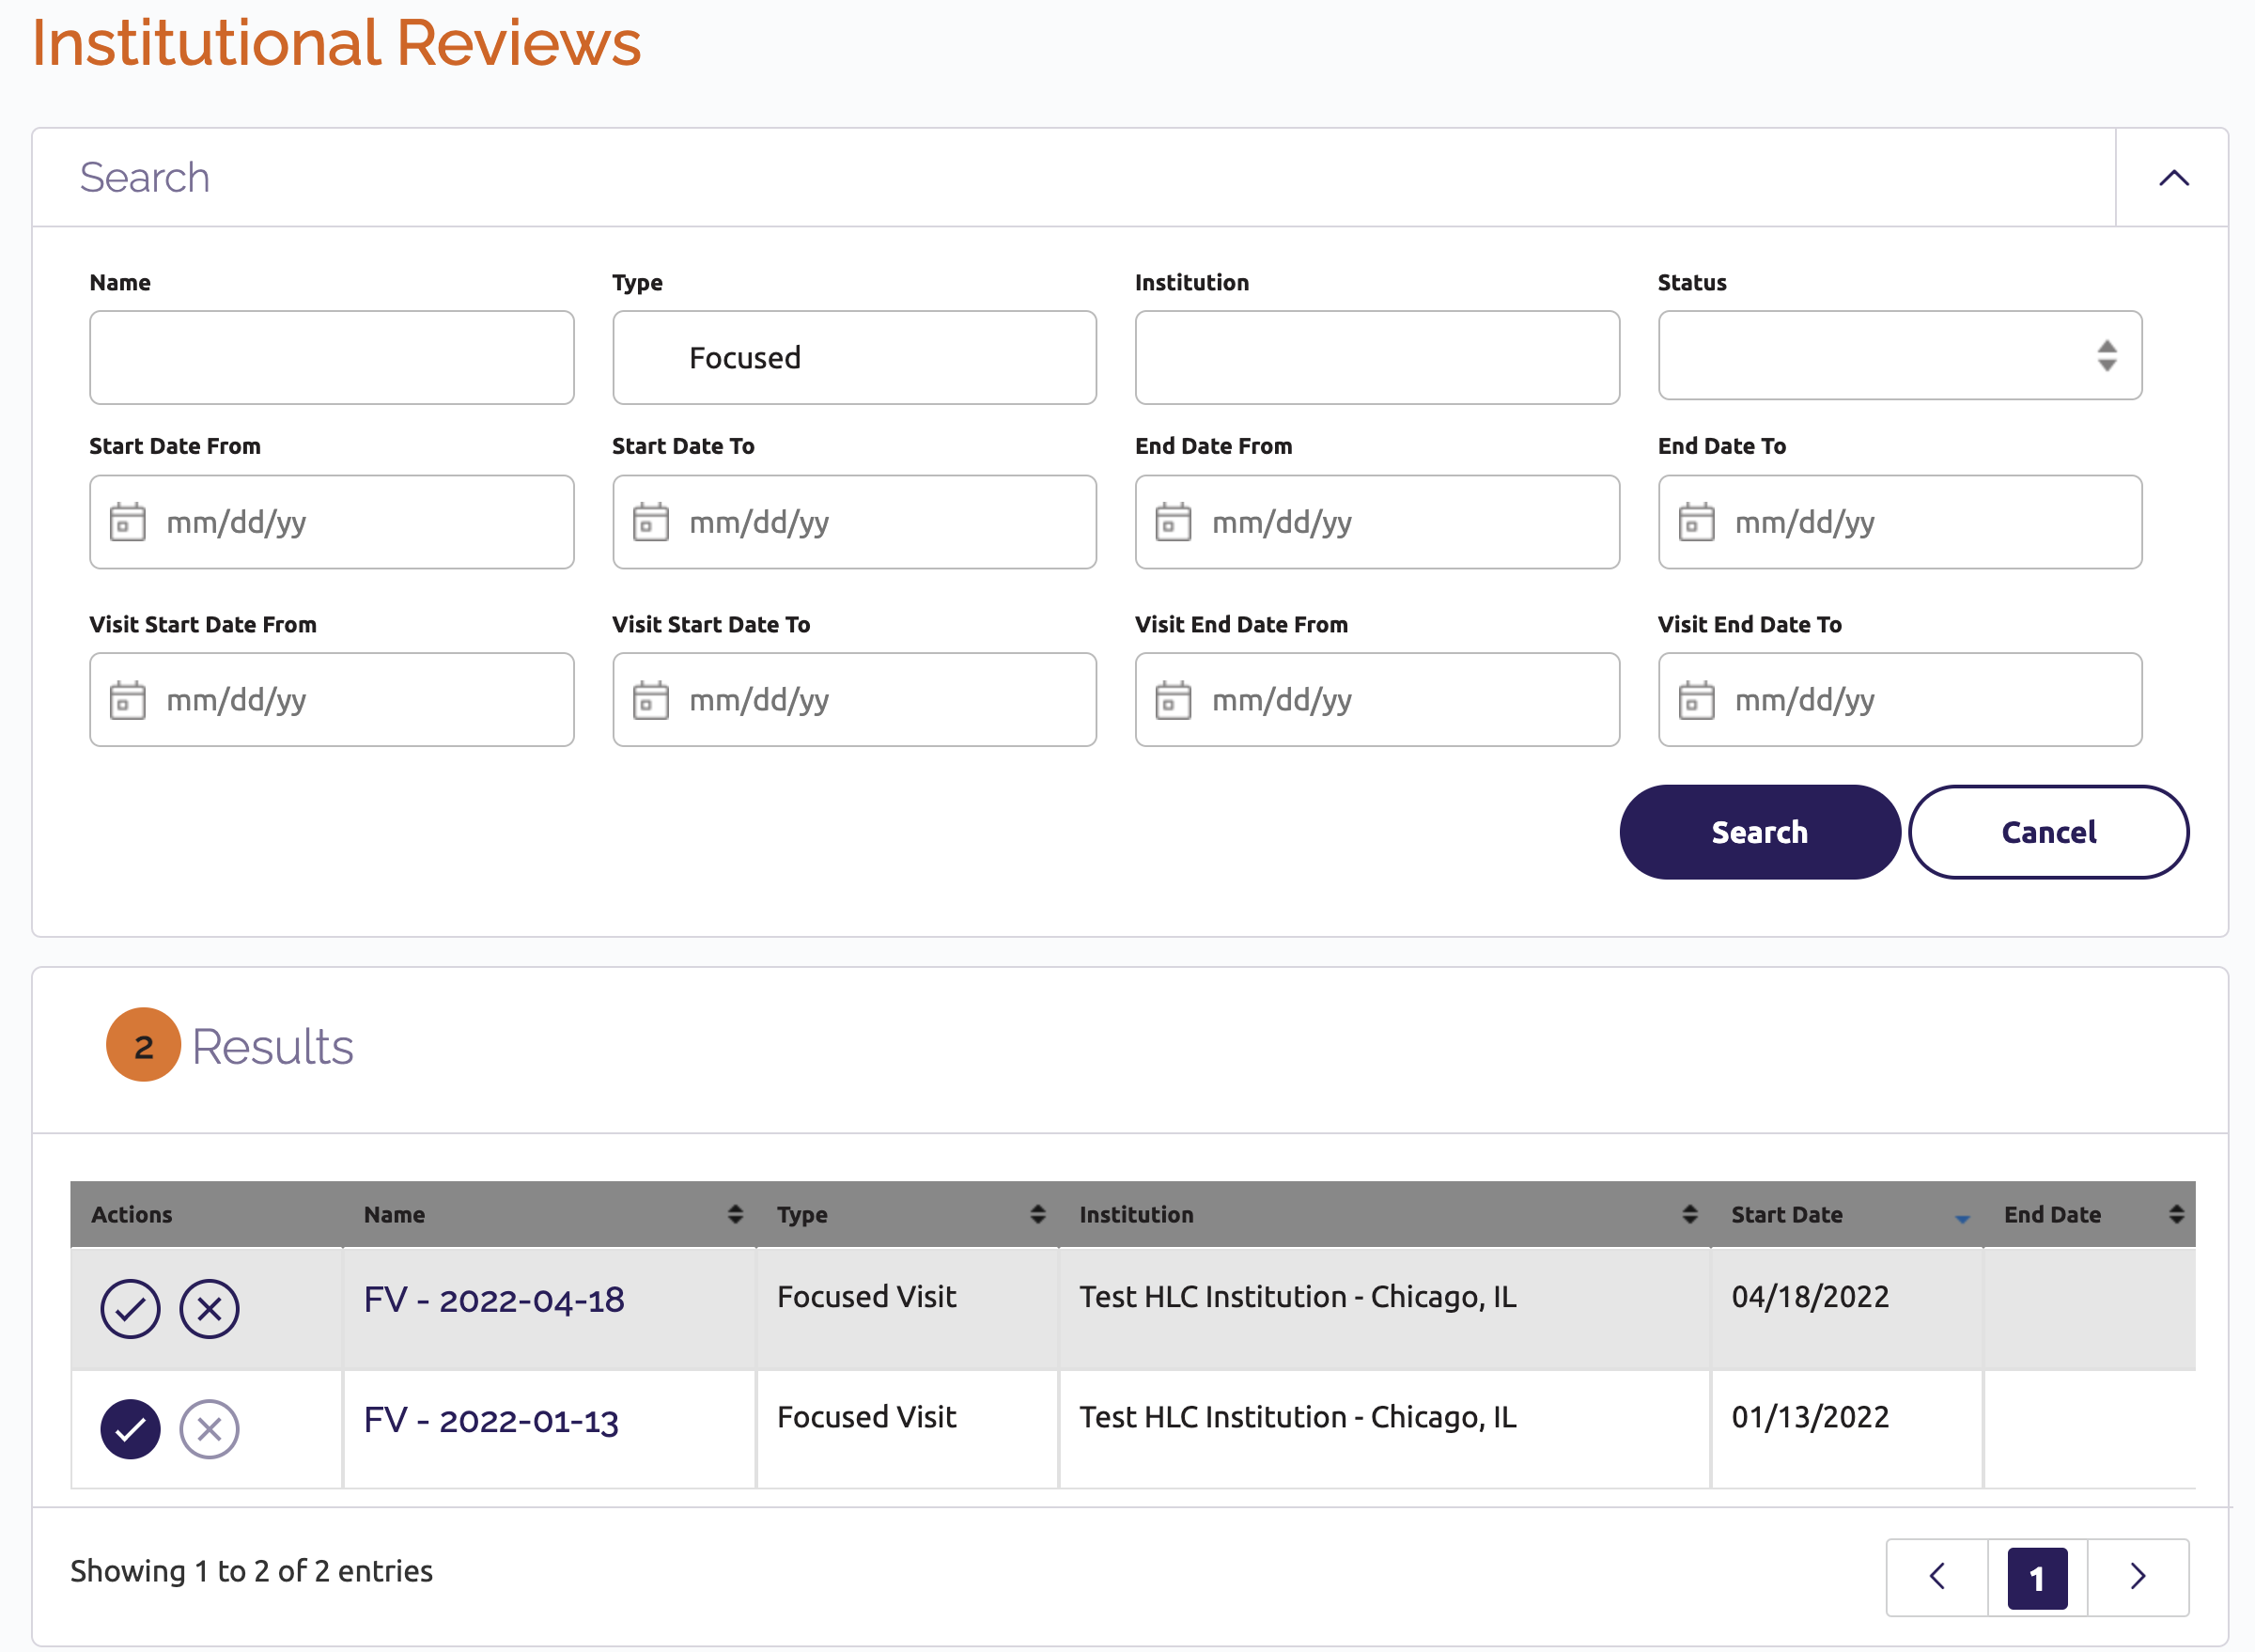 Institutional Reviews page